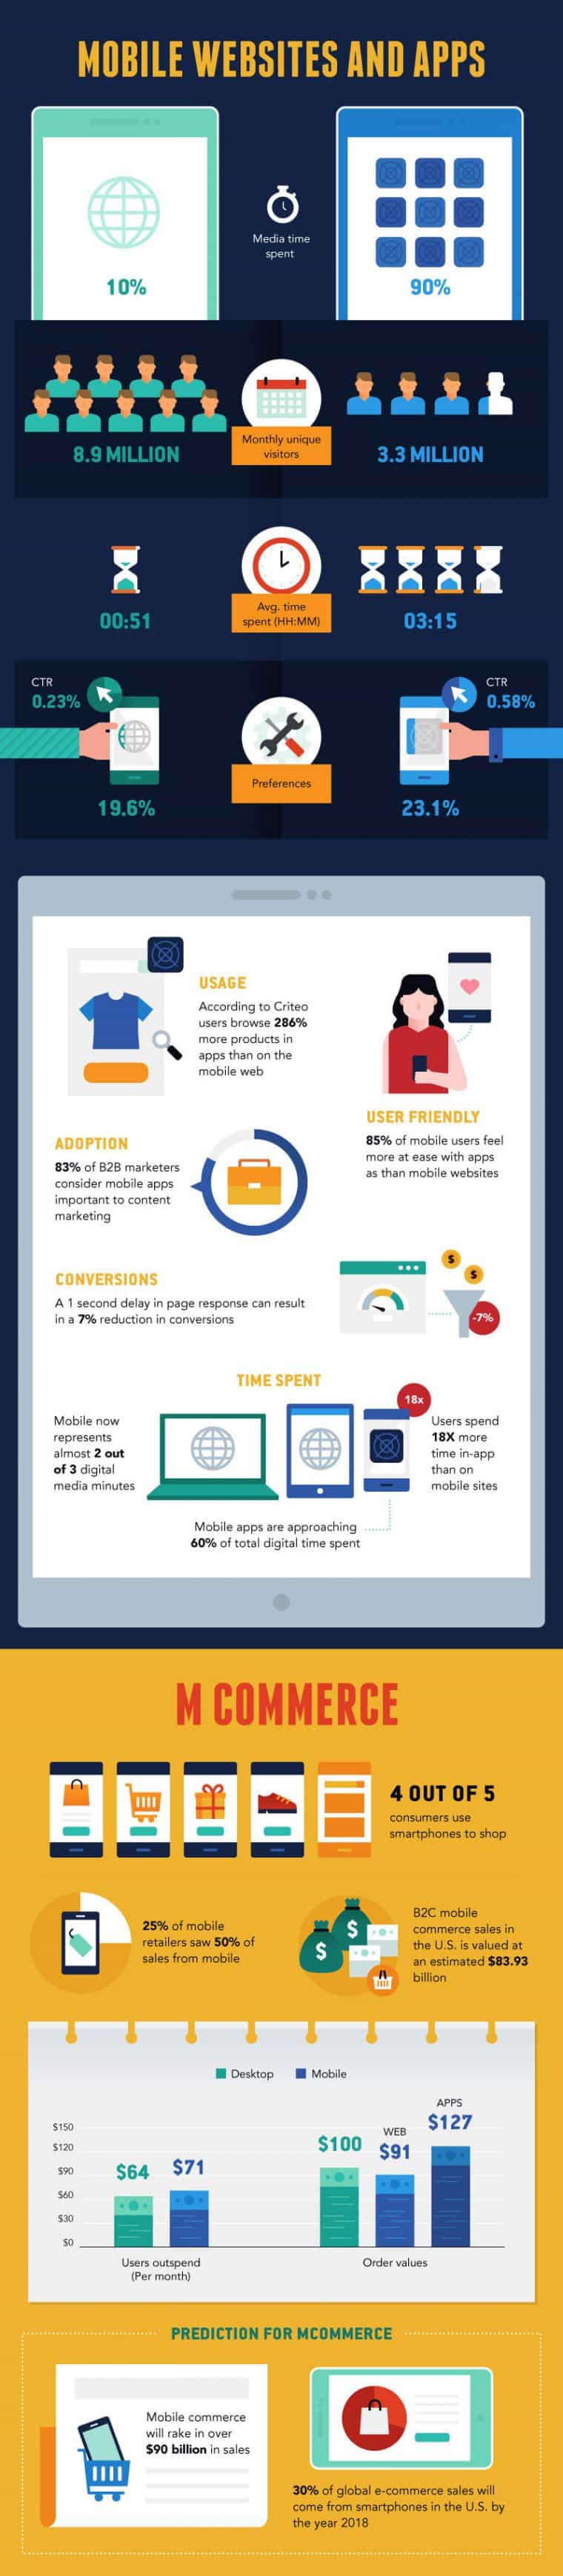 Mobile marketing 3 760x3478 Why You Should Have a Mobile Website Infographic